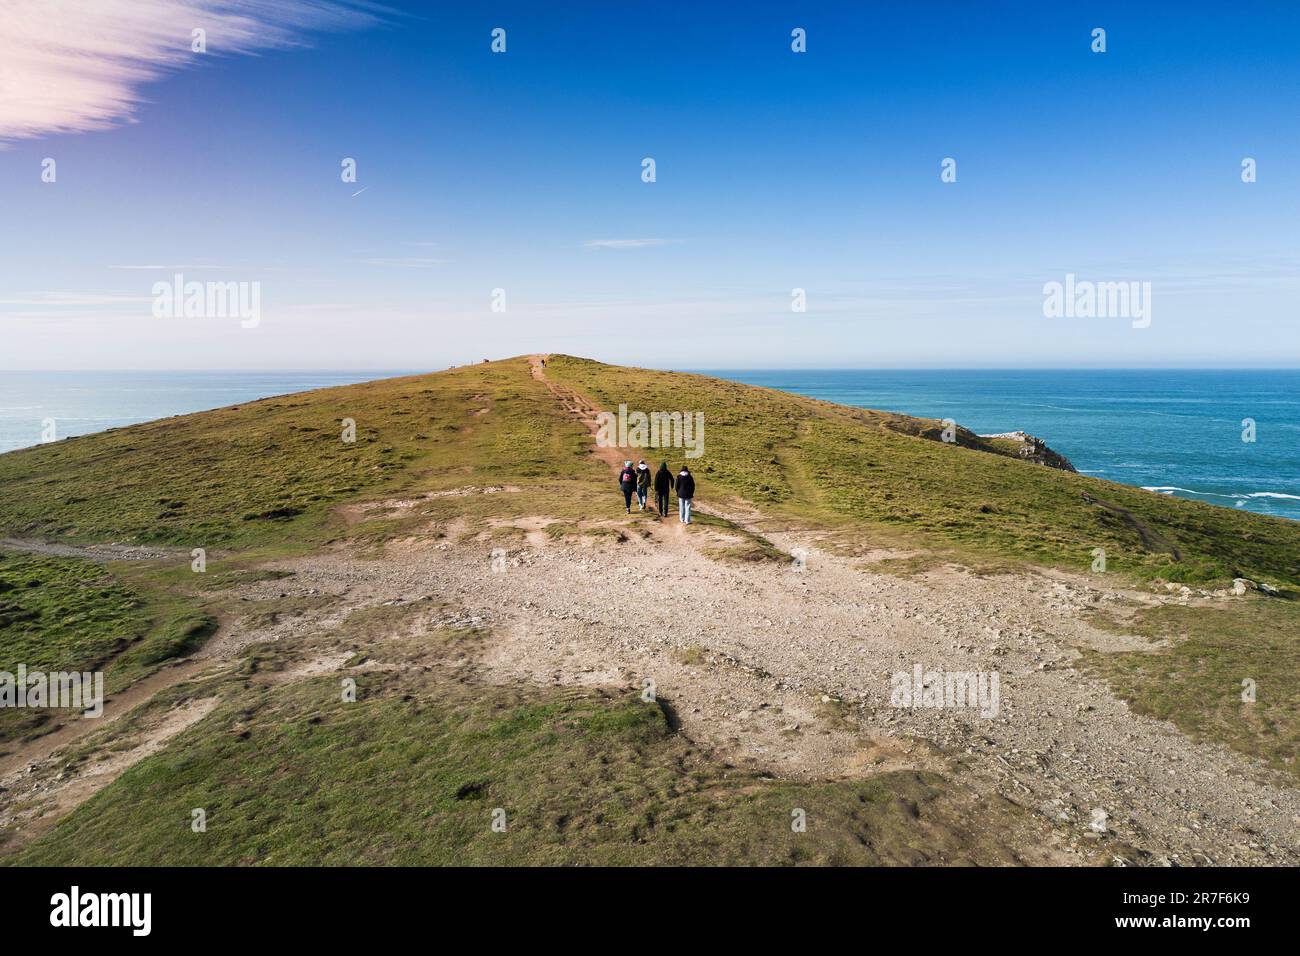 An aerial view of people walking along the worn and eroded footpath leading up to the historic round Barrow on the summit of Pentire Point East on the Stock Photo